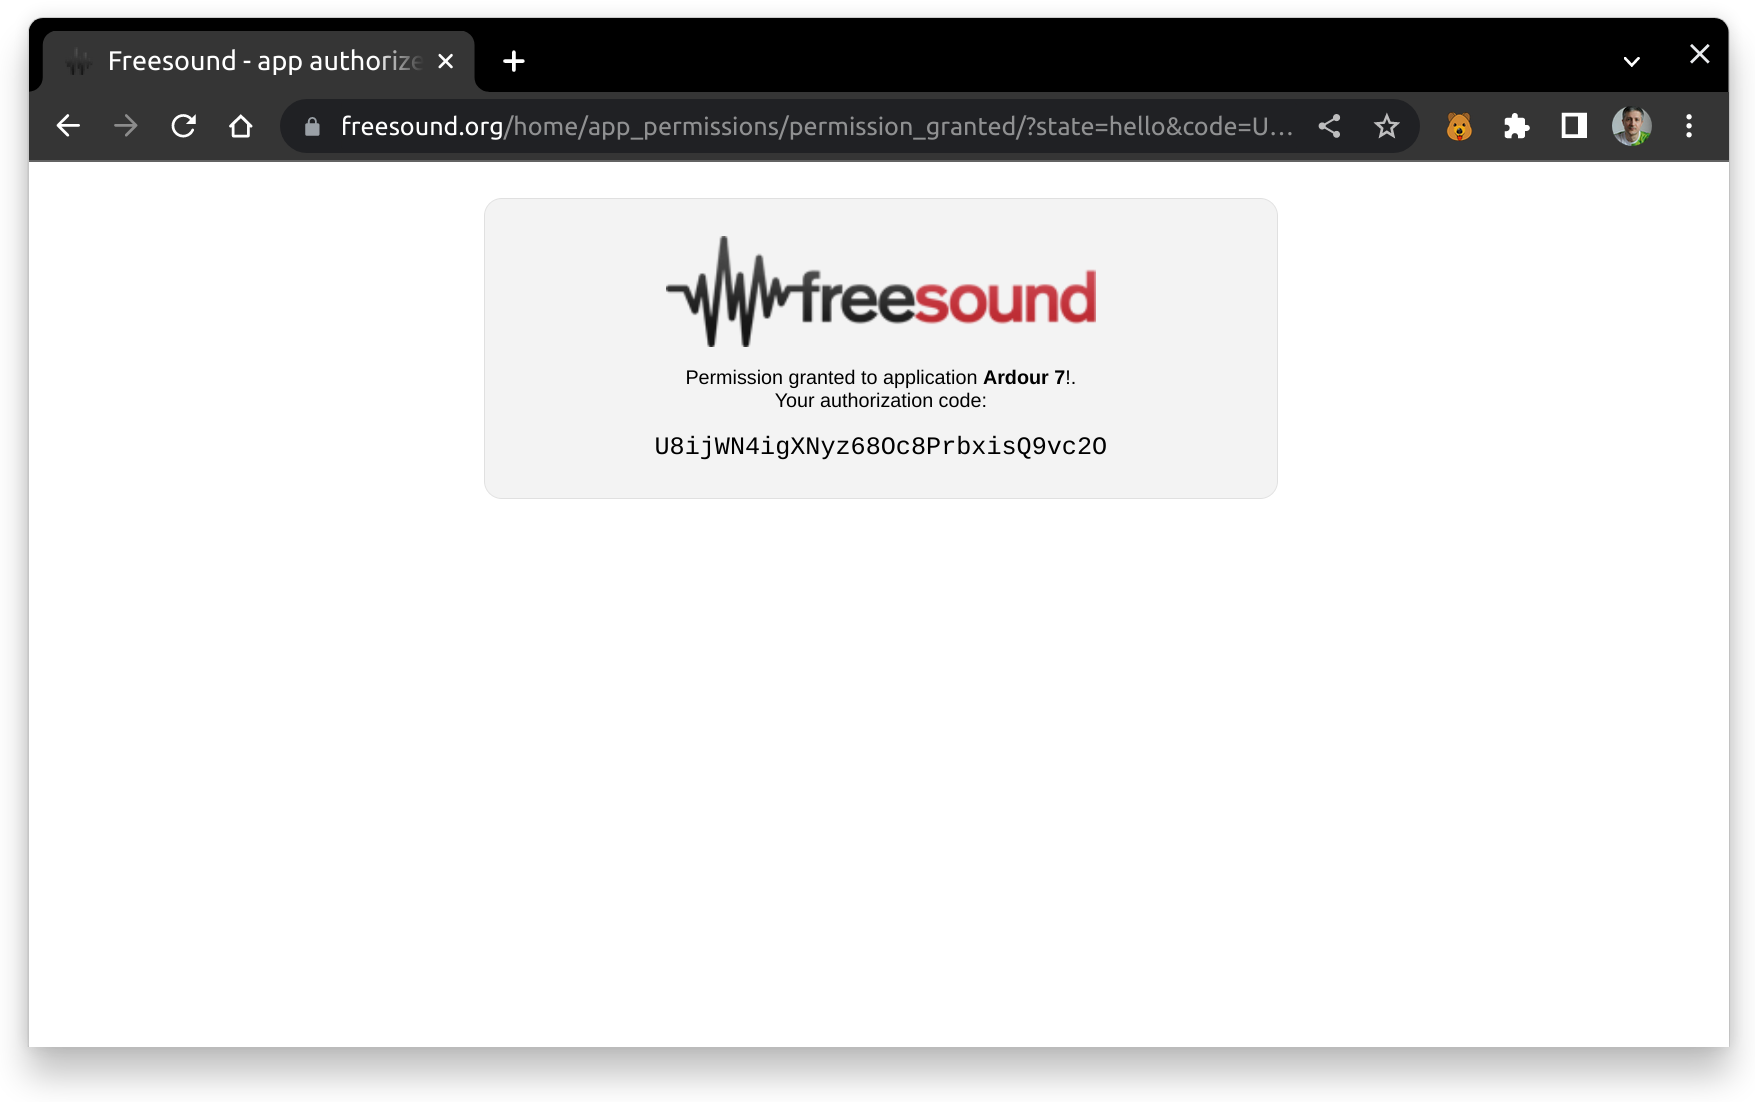 source/images/freesound-auth-code.png